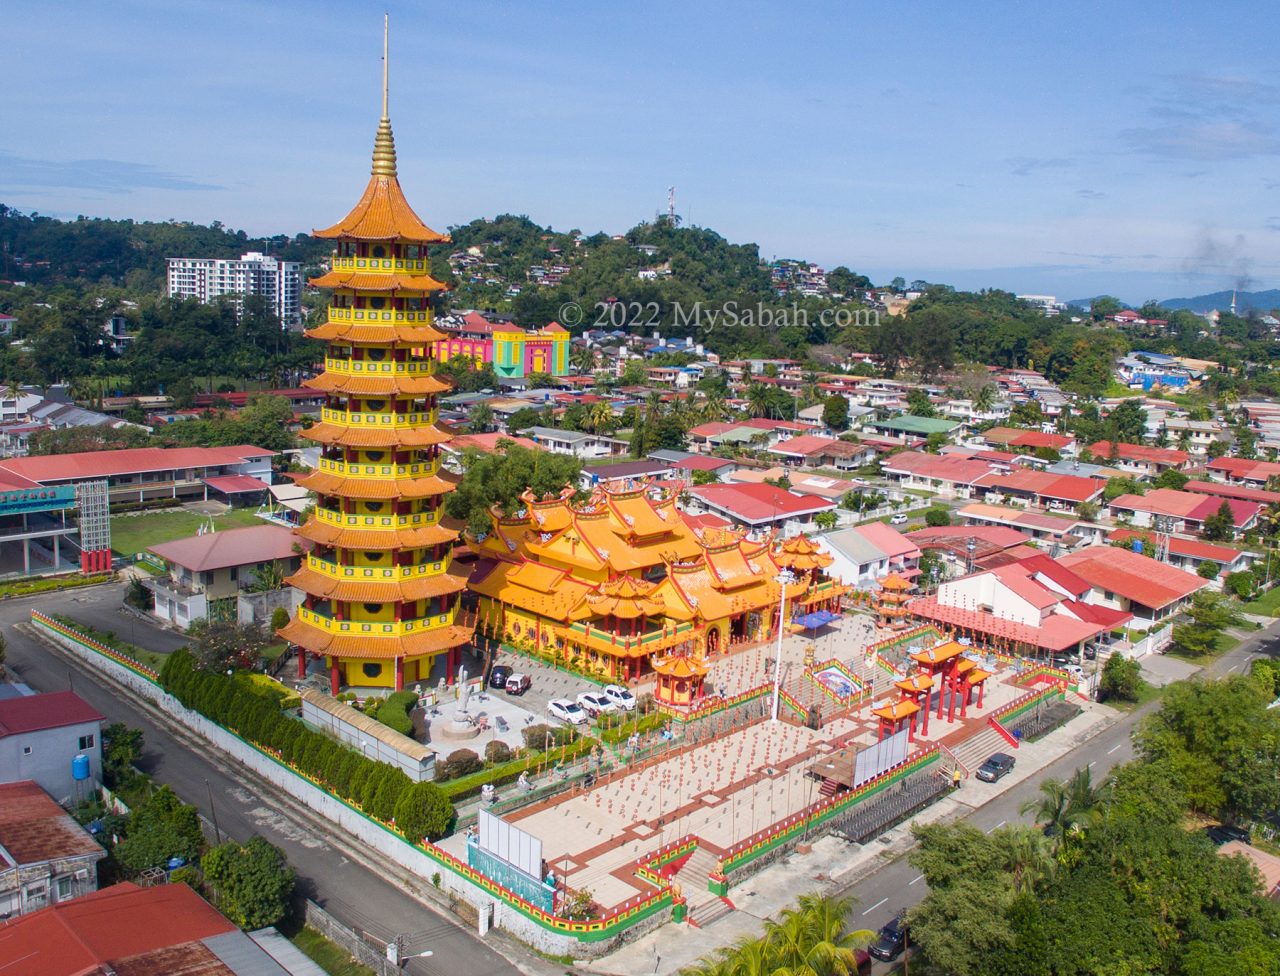 The temple and pagoda of Peak Nam Toong (碧南堂)